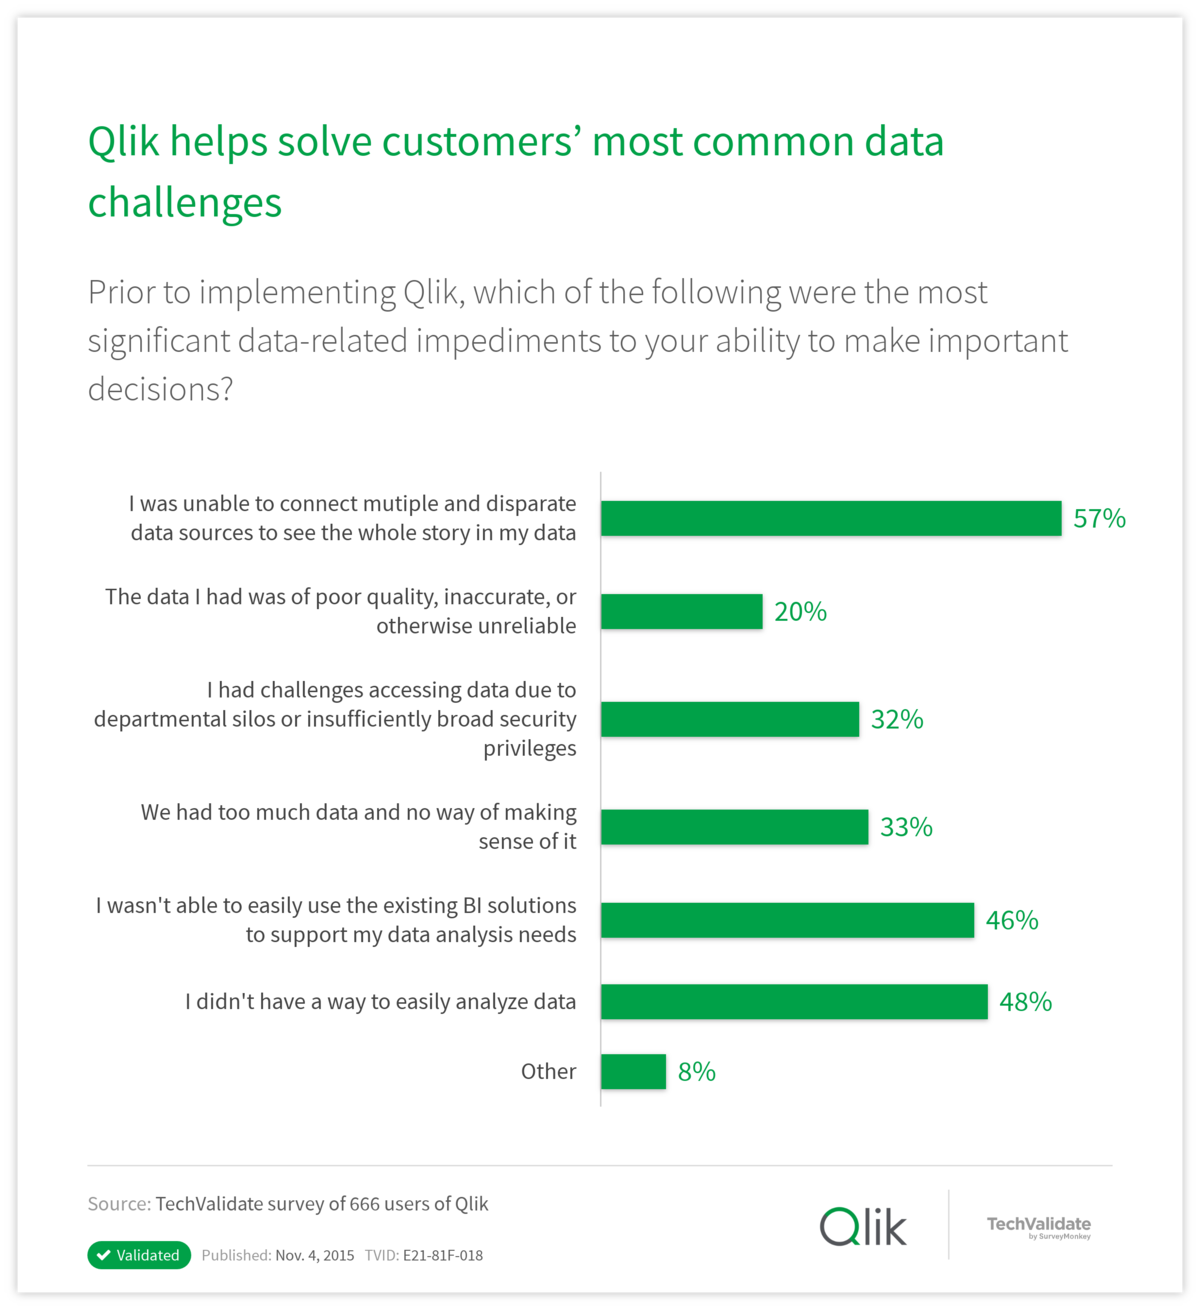 Qlik helps solve customers' most common data challenges